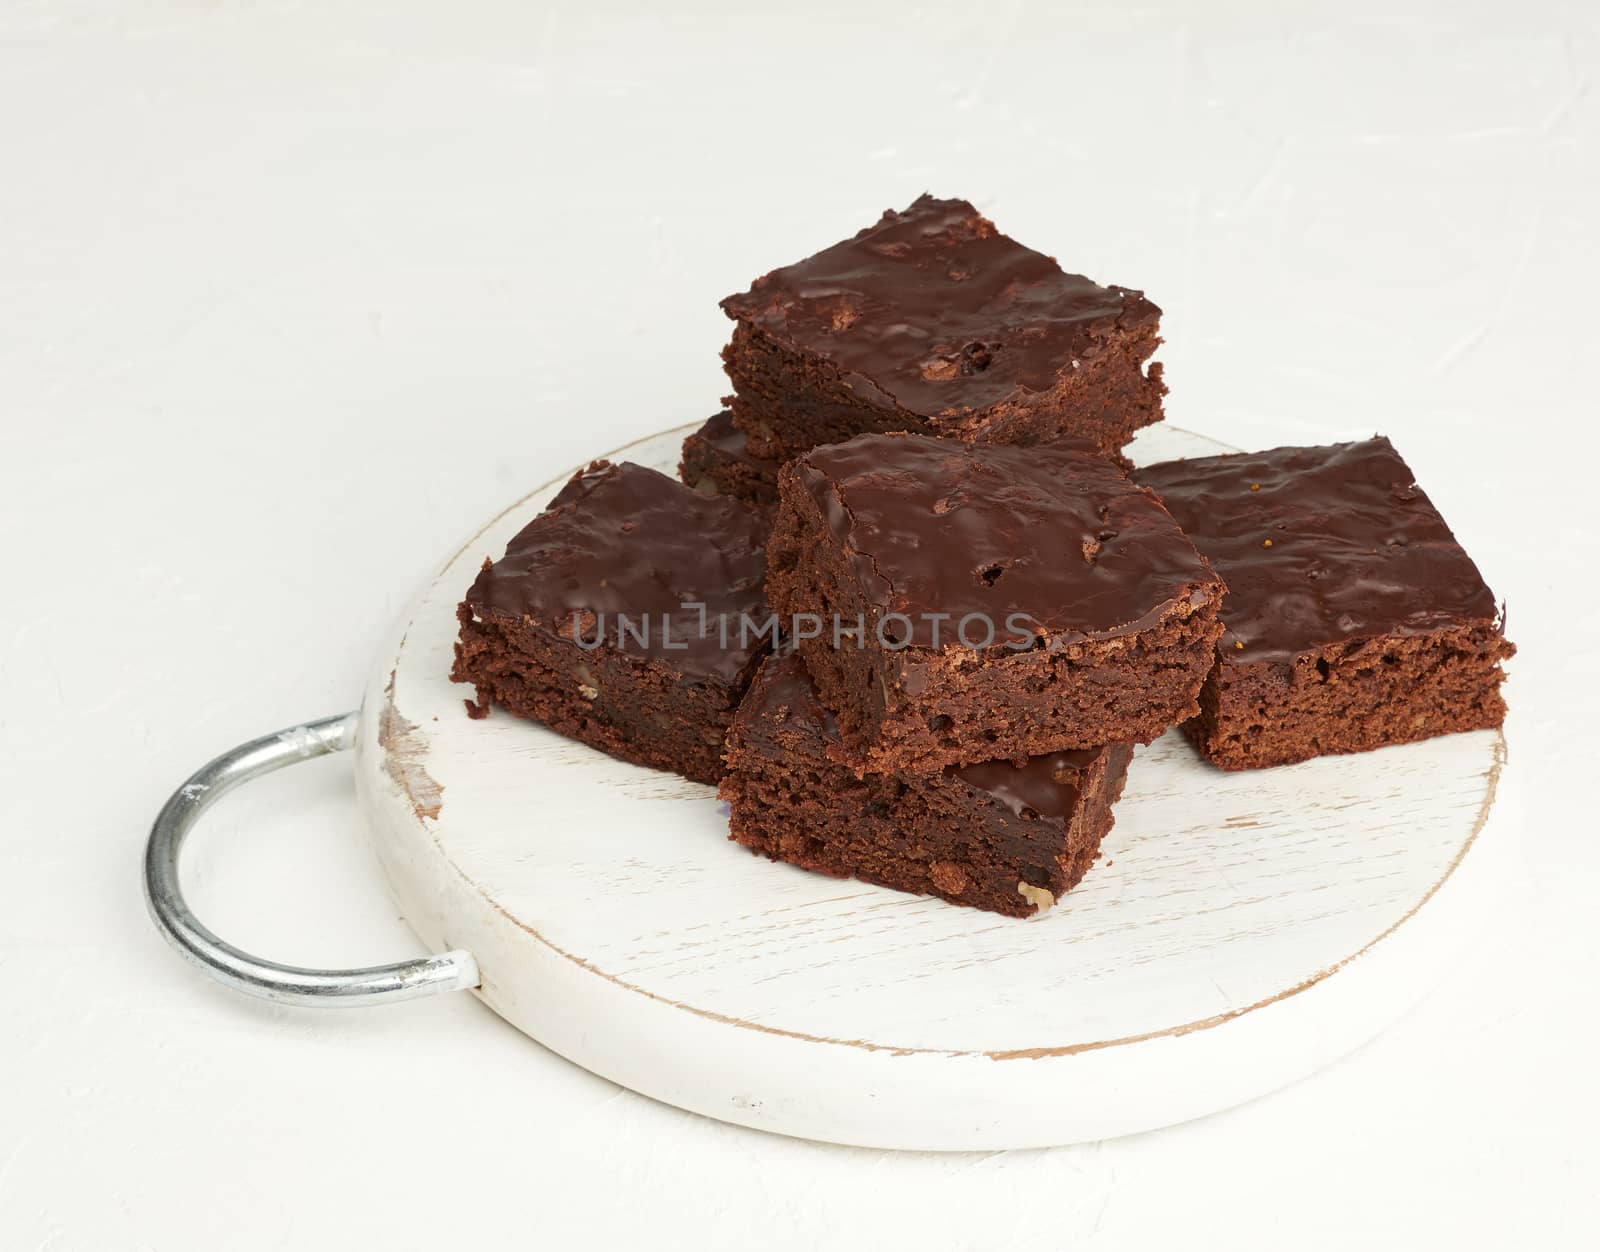 stack of square baked slices of brownie chocolate cake with walnuts on a round white wooden board, top view